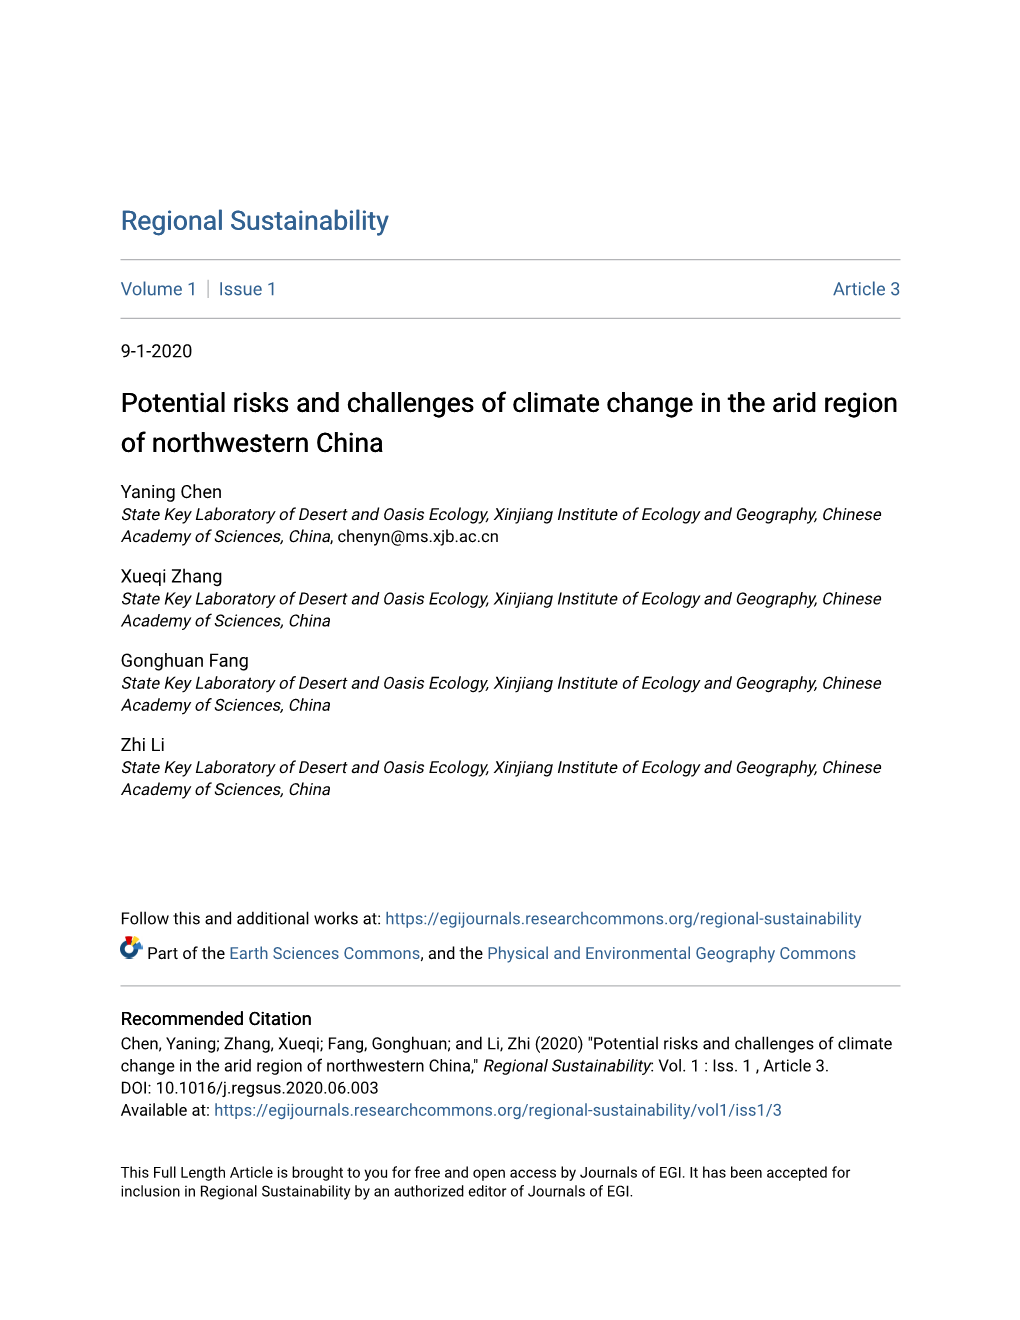 Potential Risks and Challenges of Climate Change in the Arid Region of Northwestern China